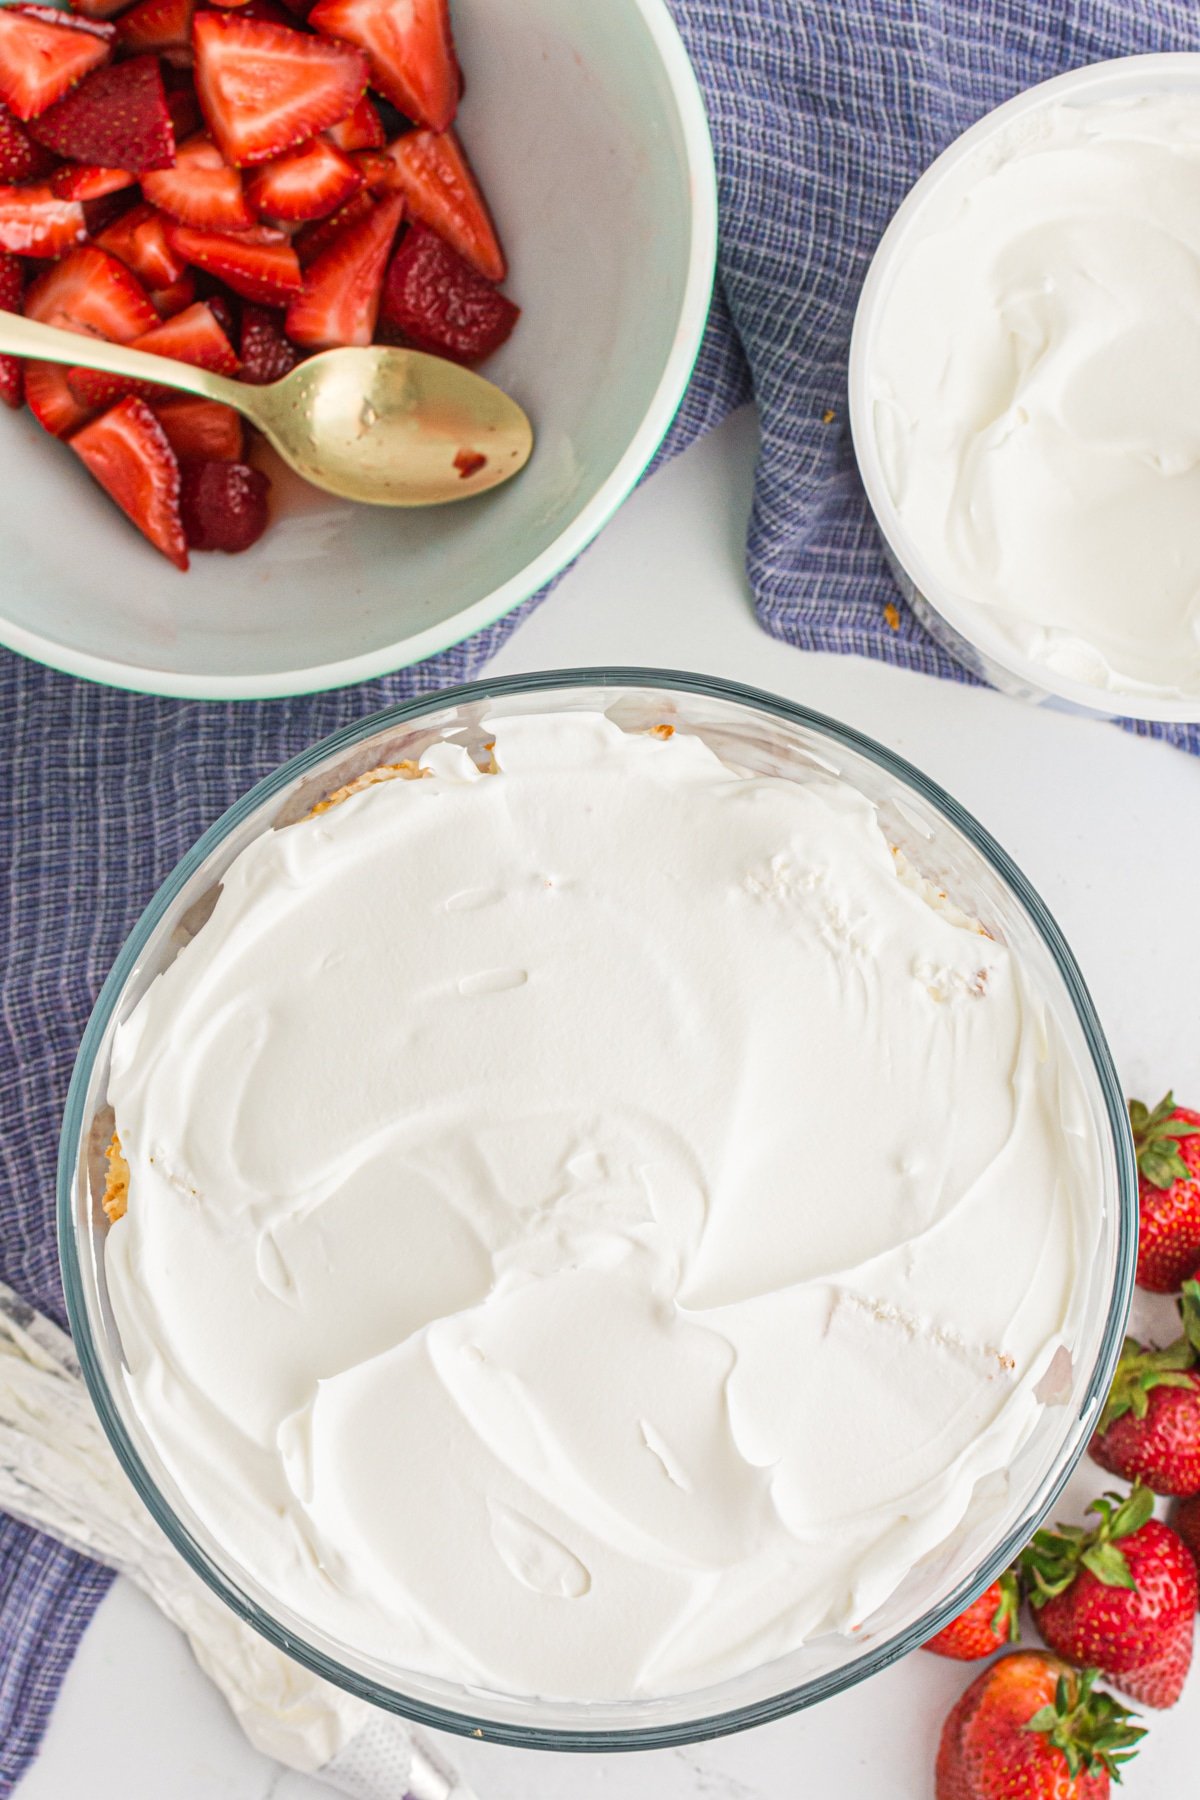 Layering with whipped cream.